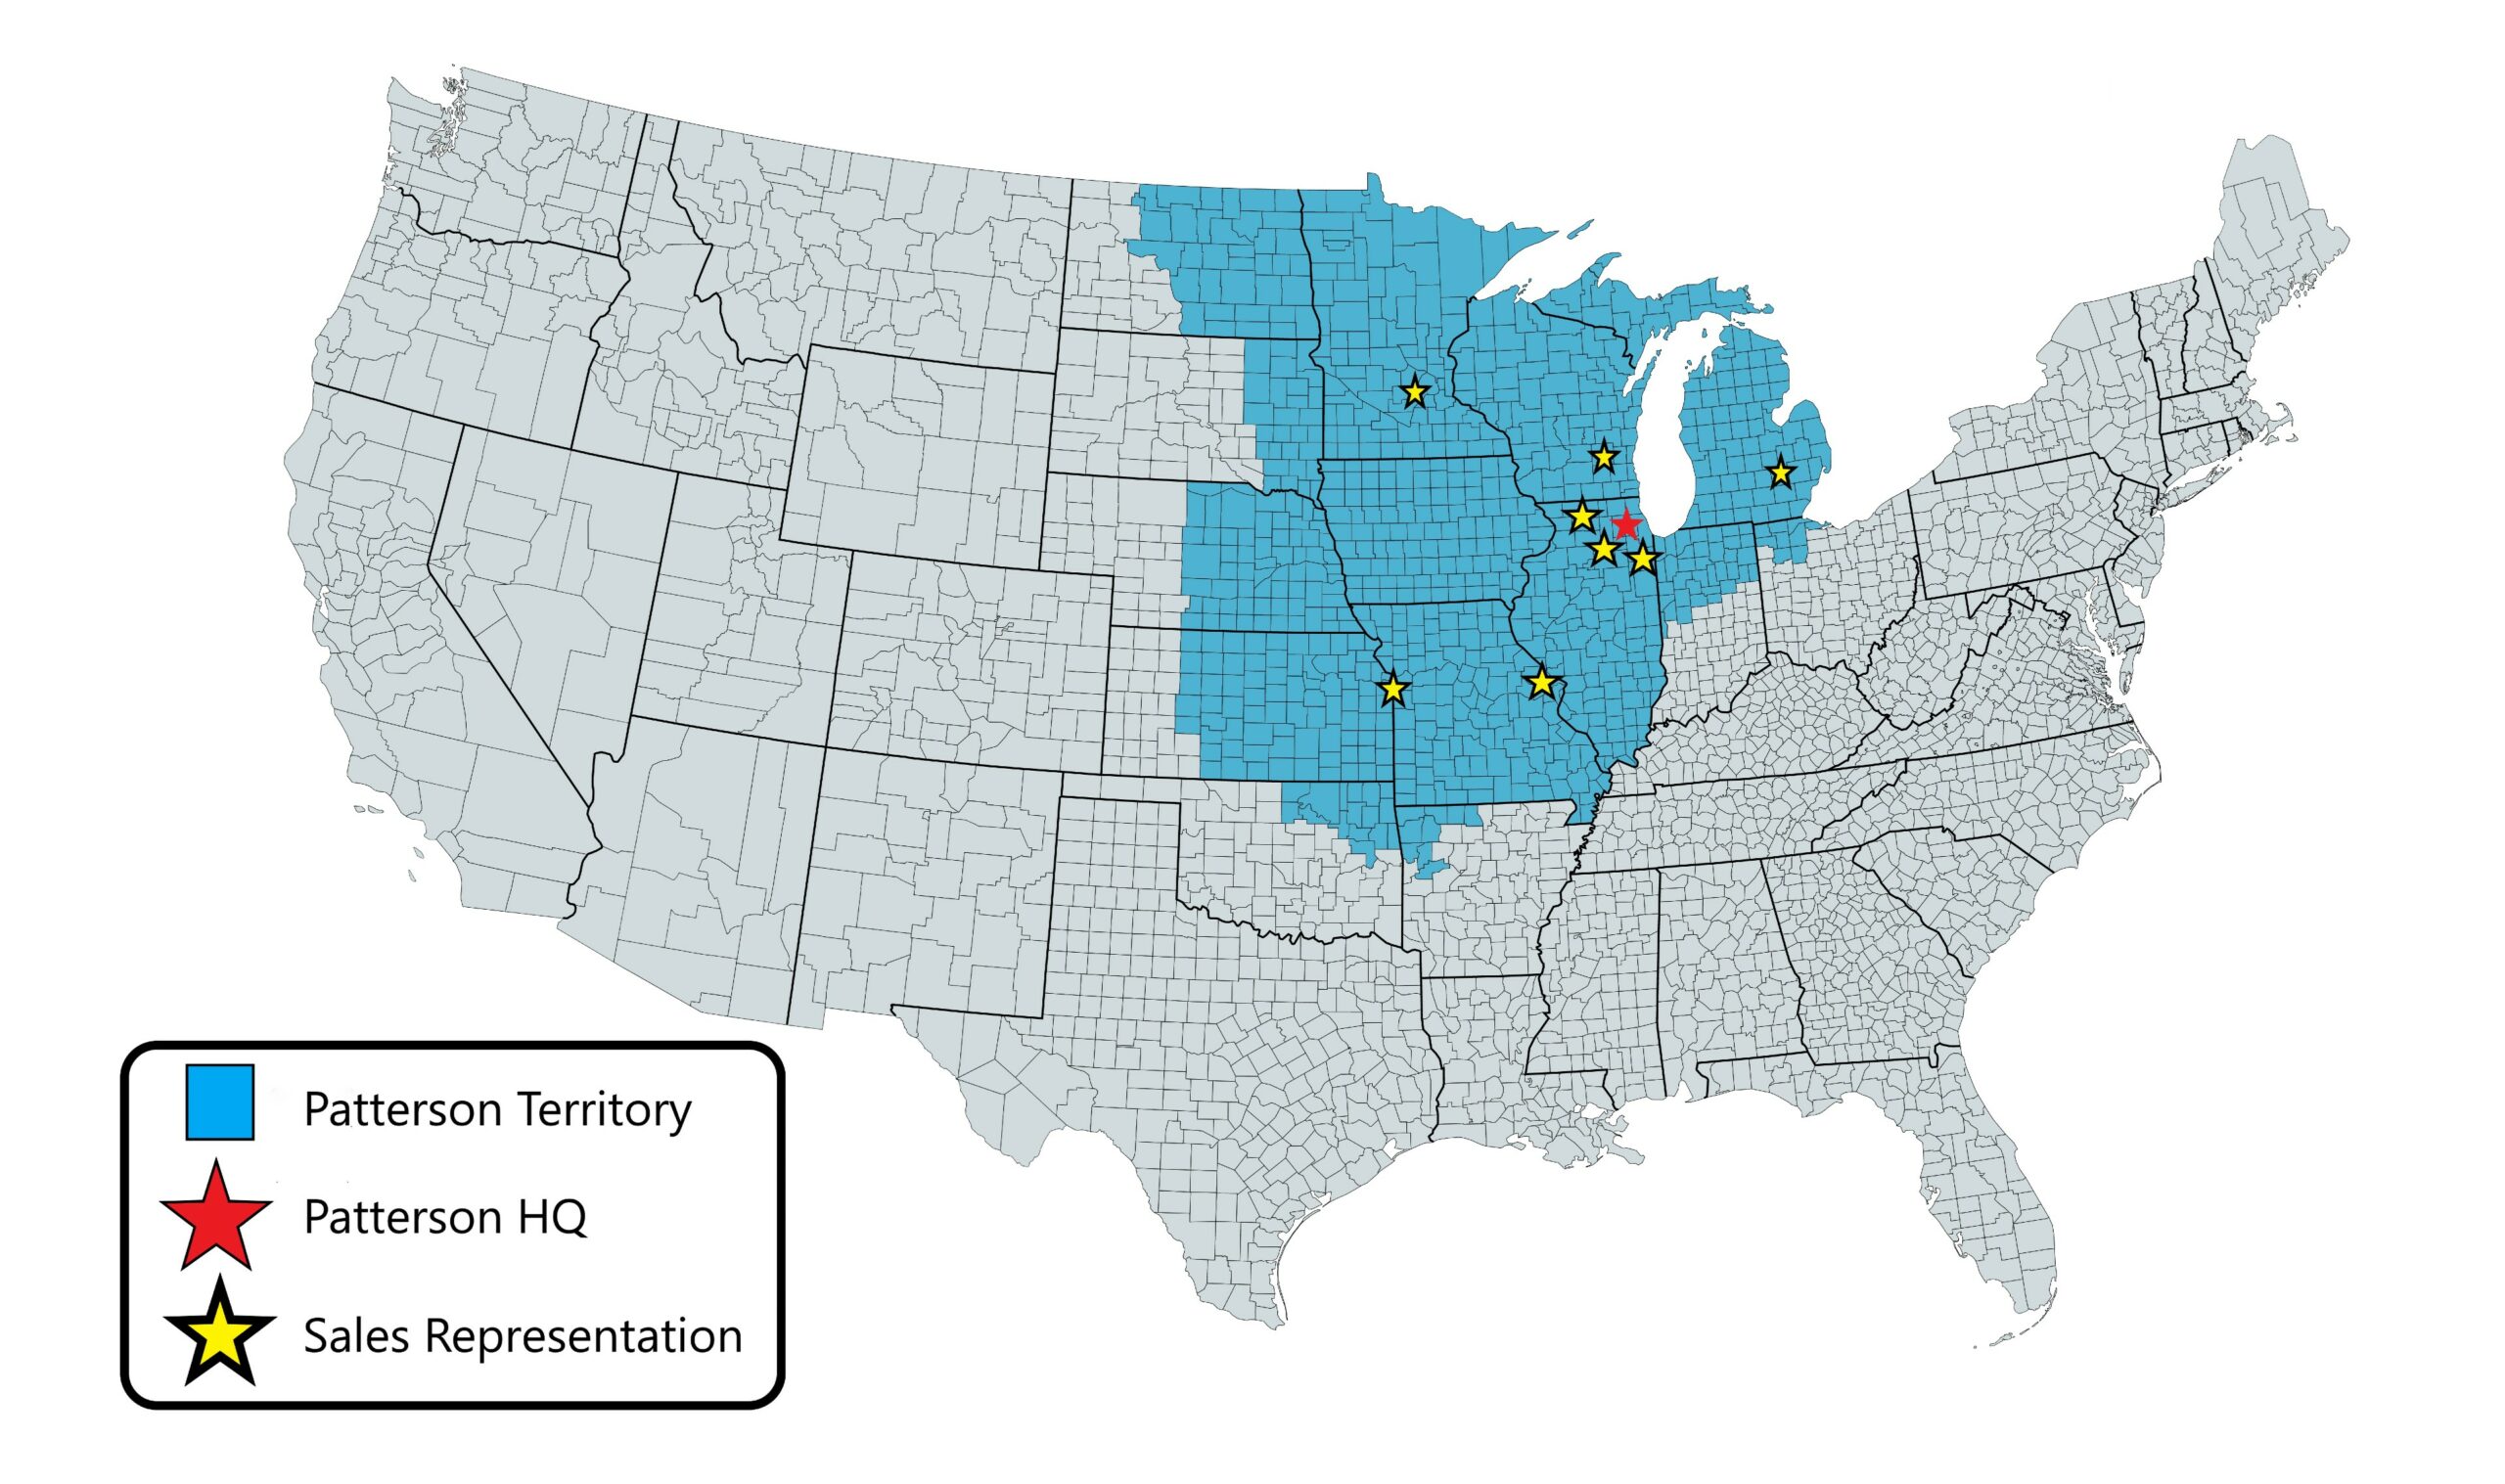 PCI serves 11 Midwestern states.